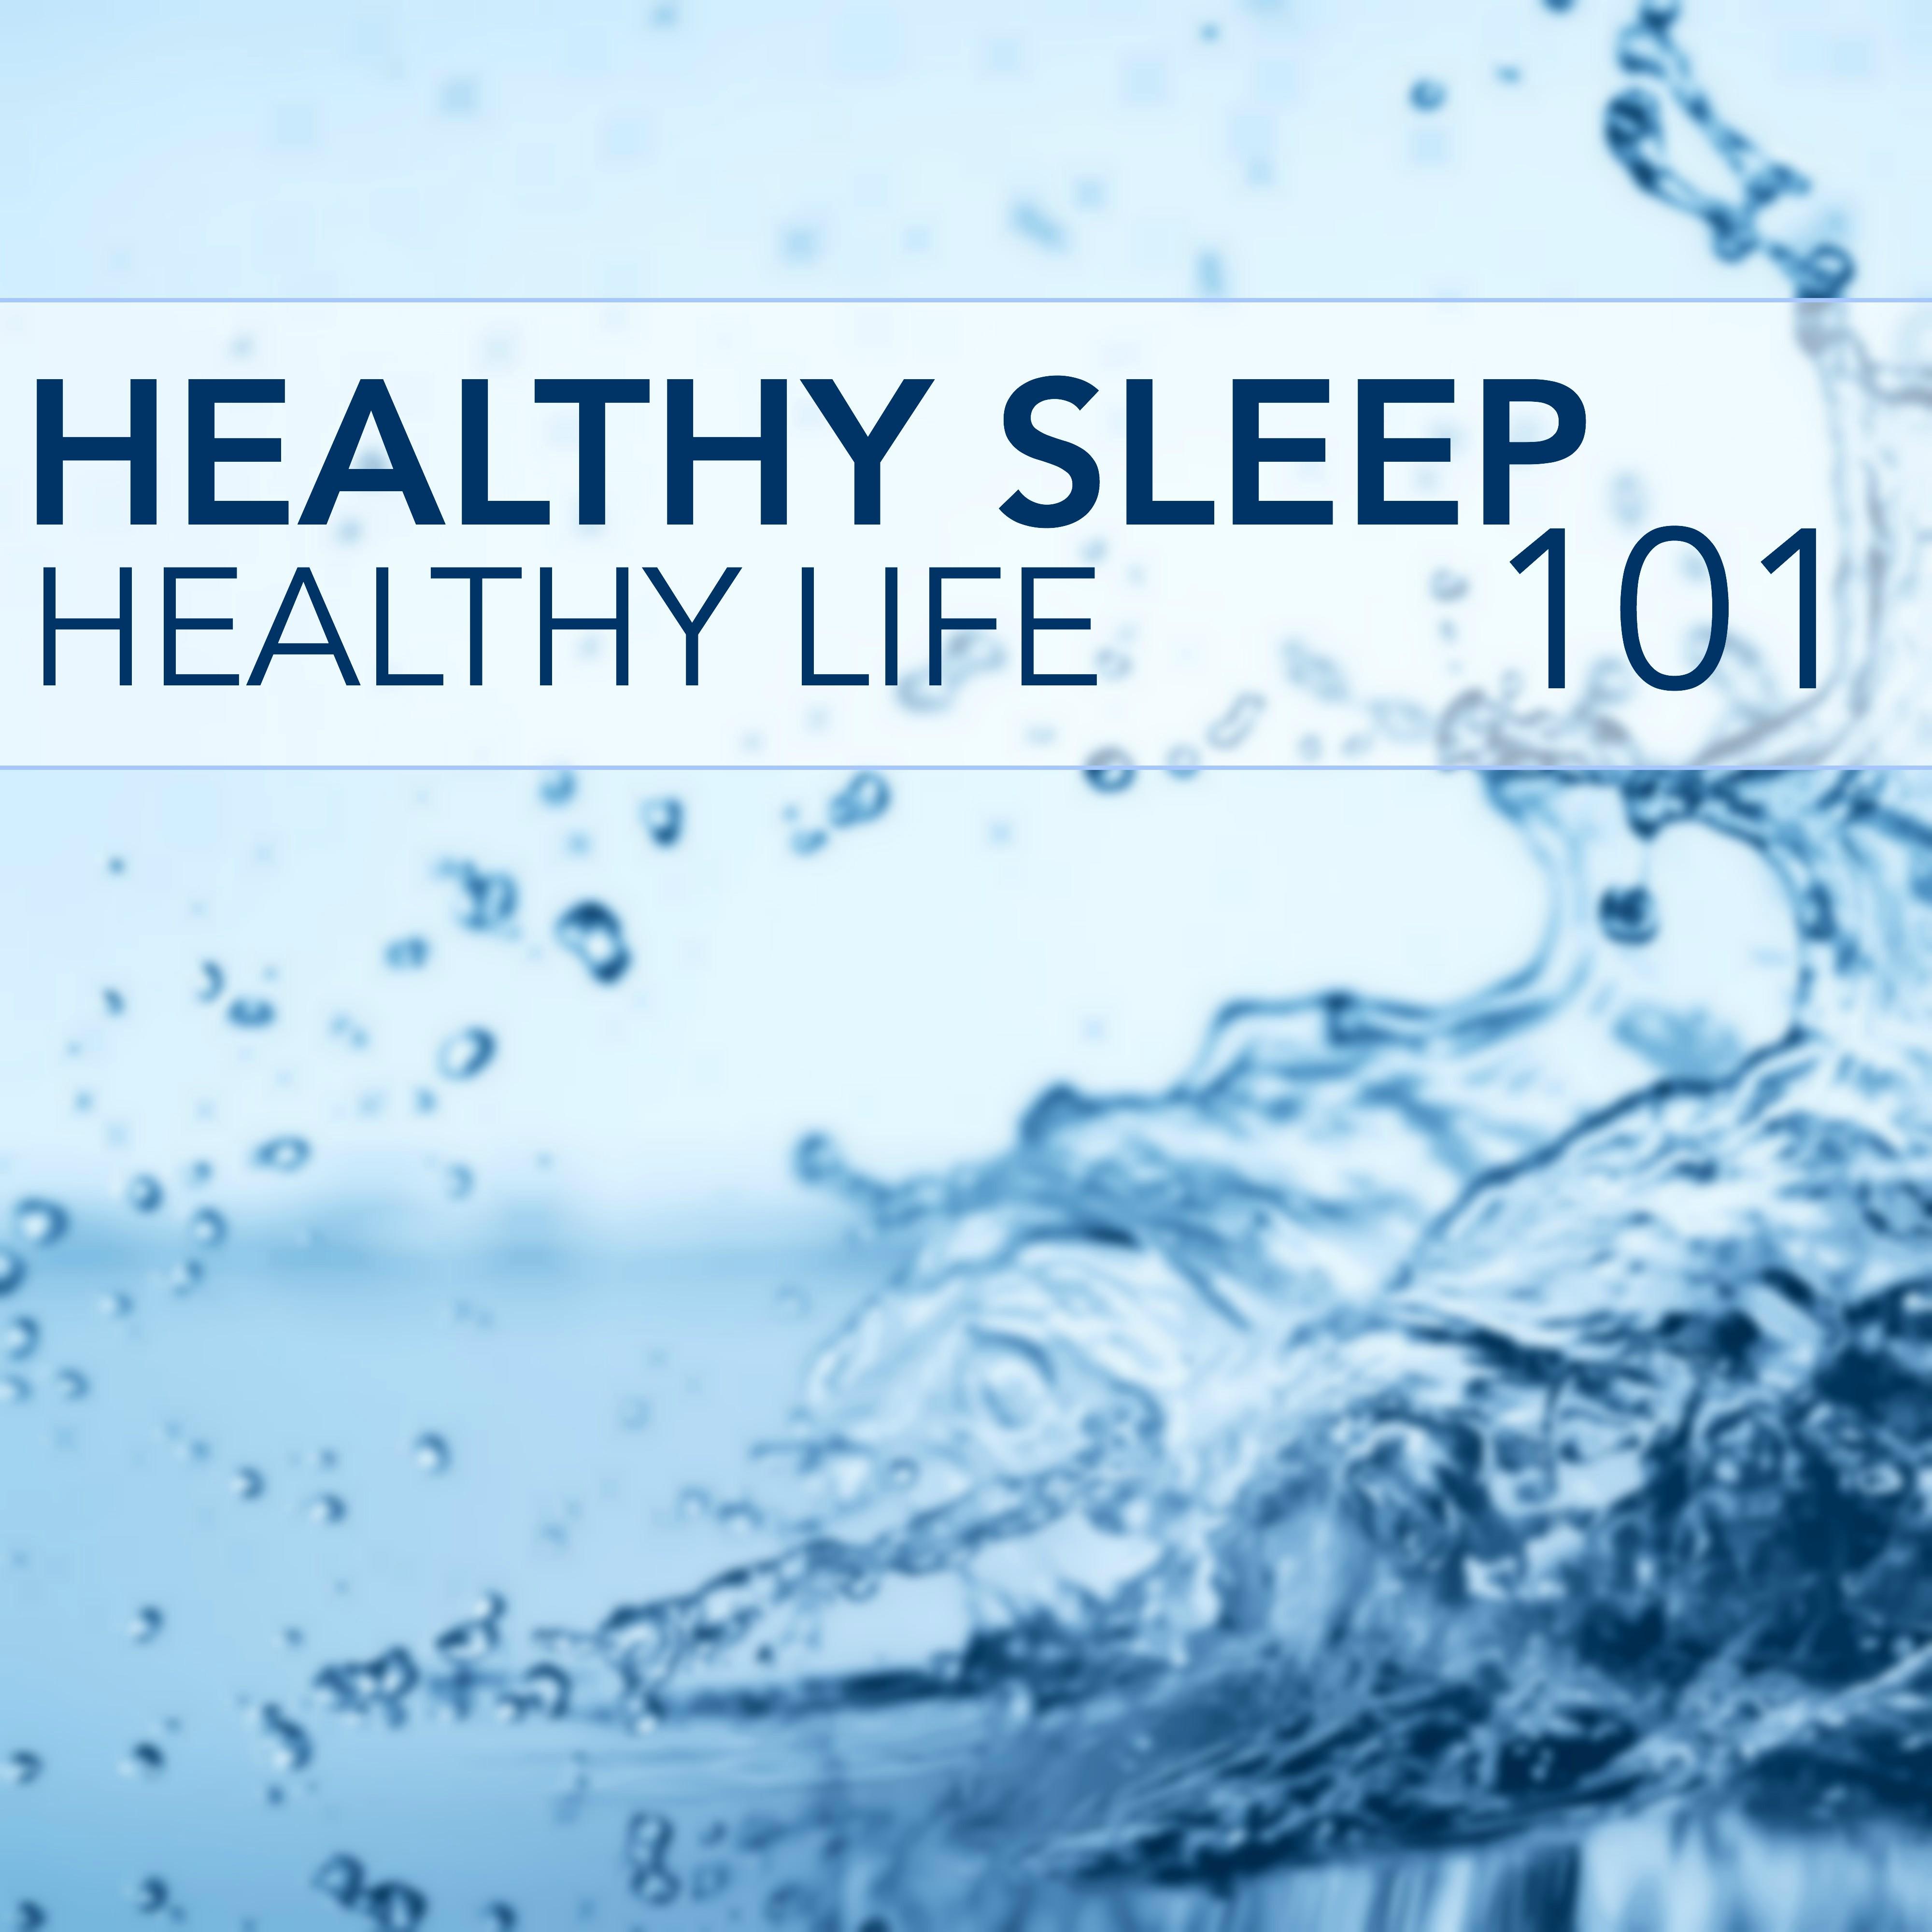 Healthy Sleep Healthy Life - 101 Background Emotional Songs for Spa Sleep Relaxation, Mindfulness Meditation, Deep Relax, Pure Massage, No Stress, Rest & Sleep Well